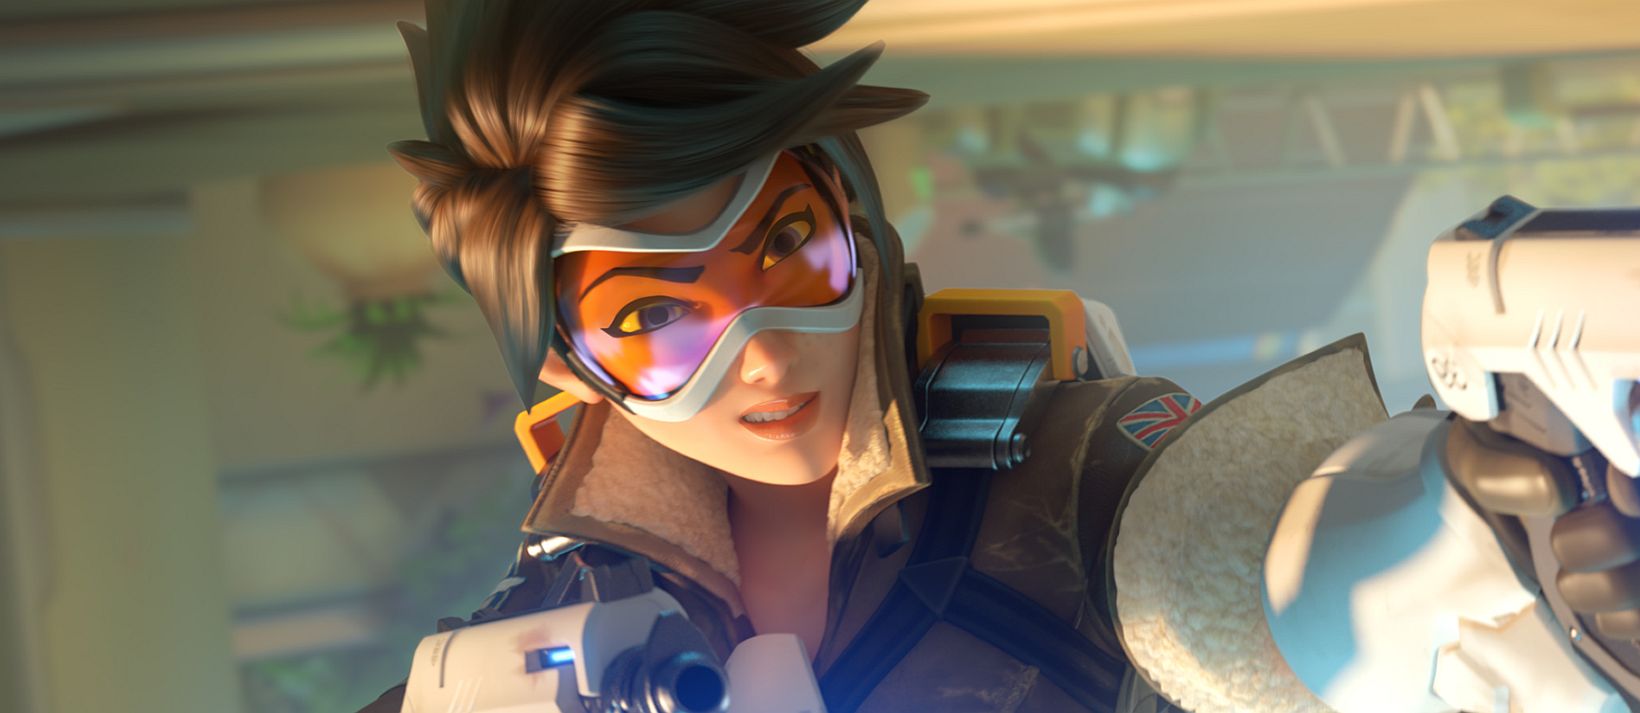 Image for Overwatch earned $269M in digital revenues across PC and console - SuperData